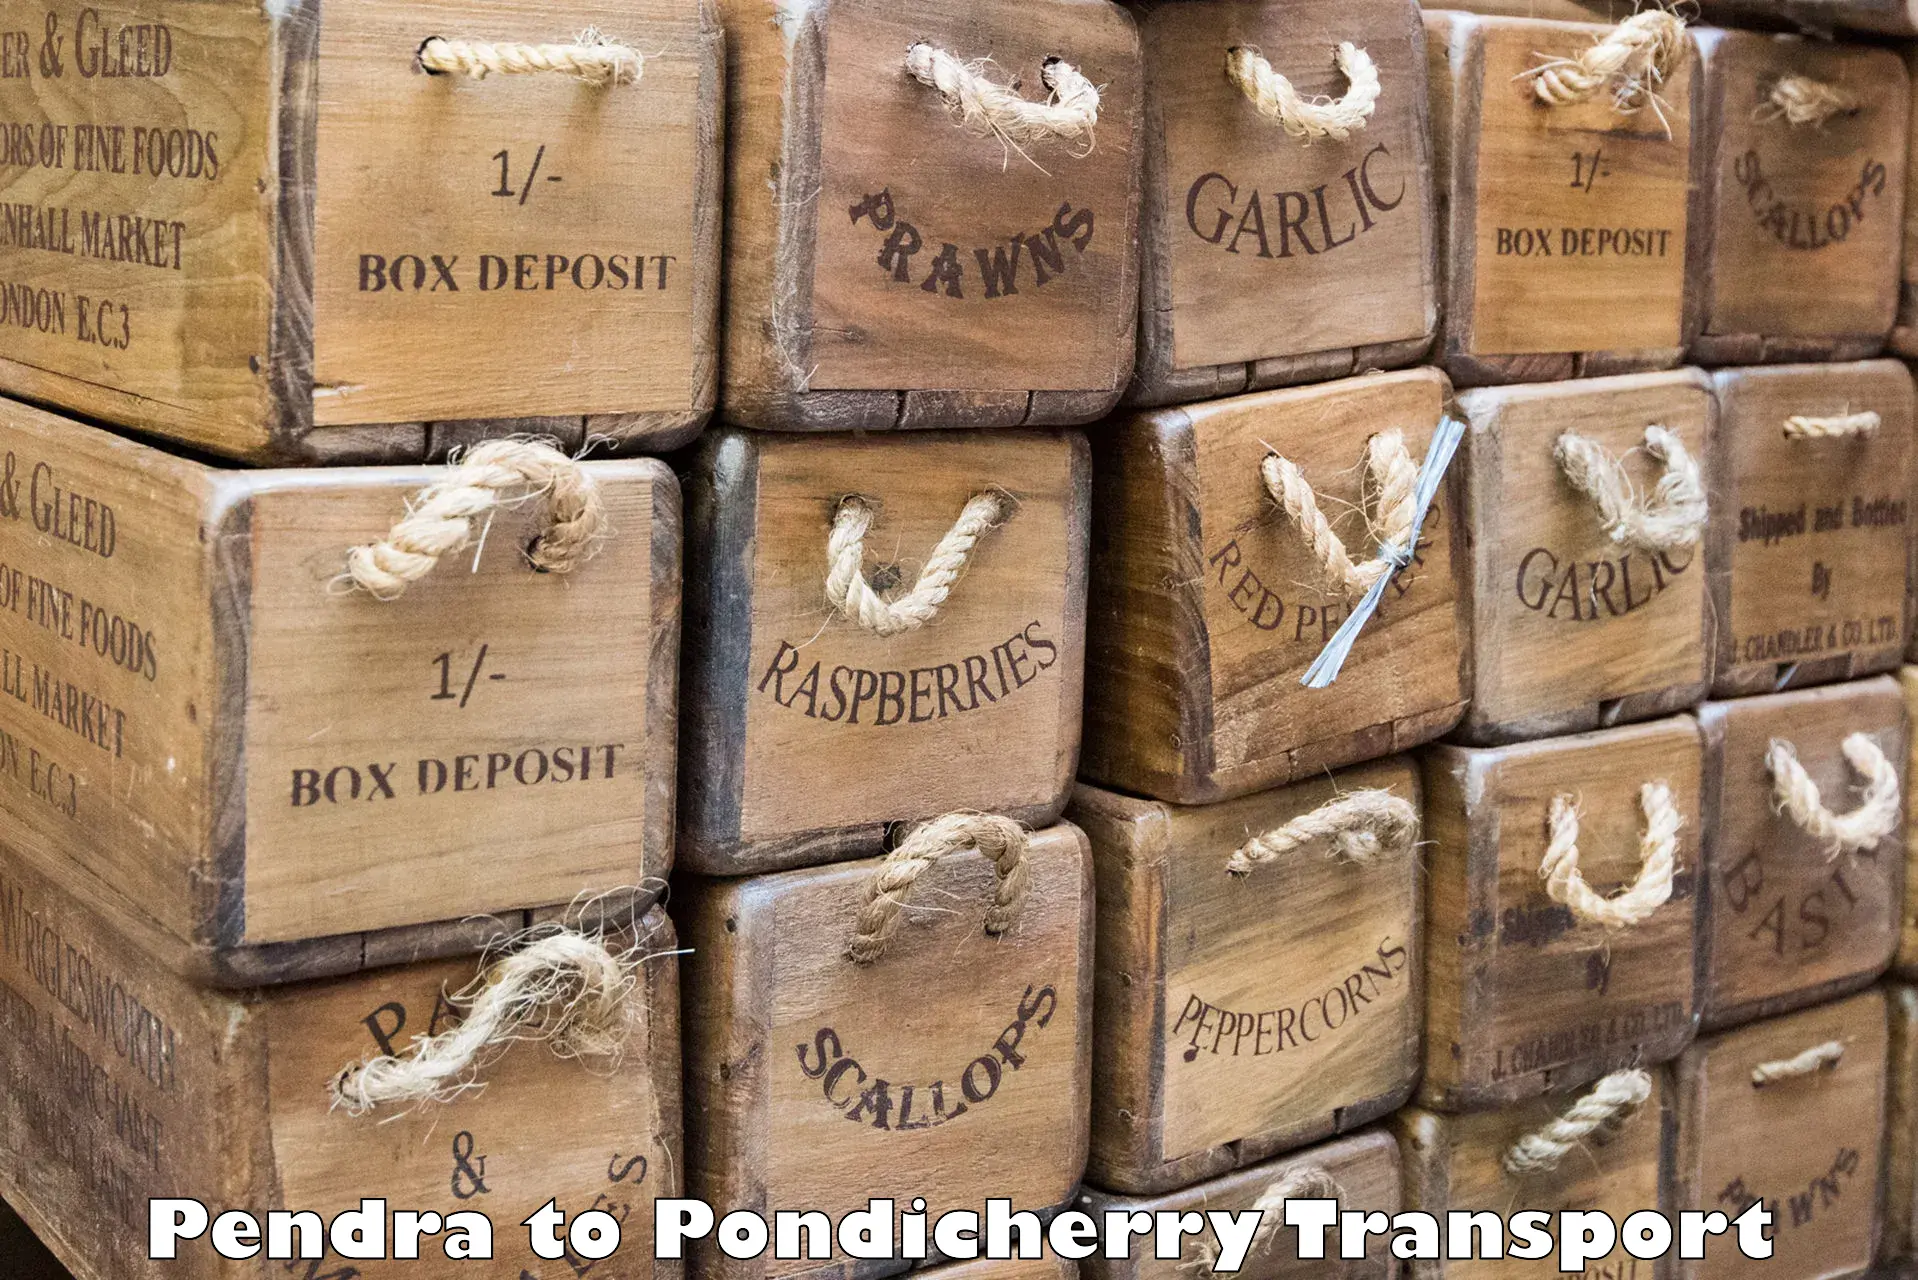 Container transport service Pendra to Pondicherry